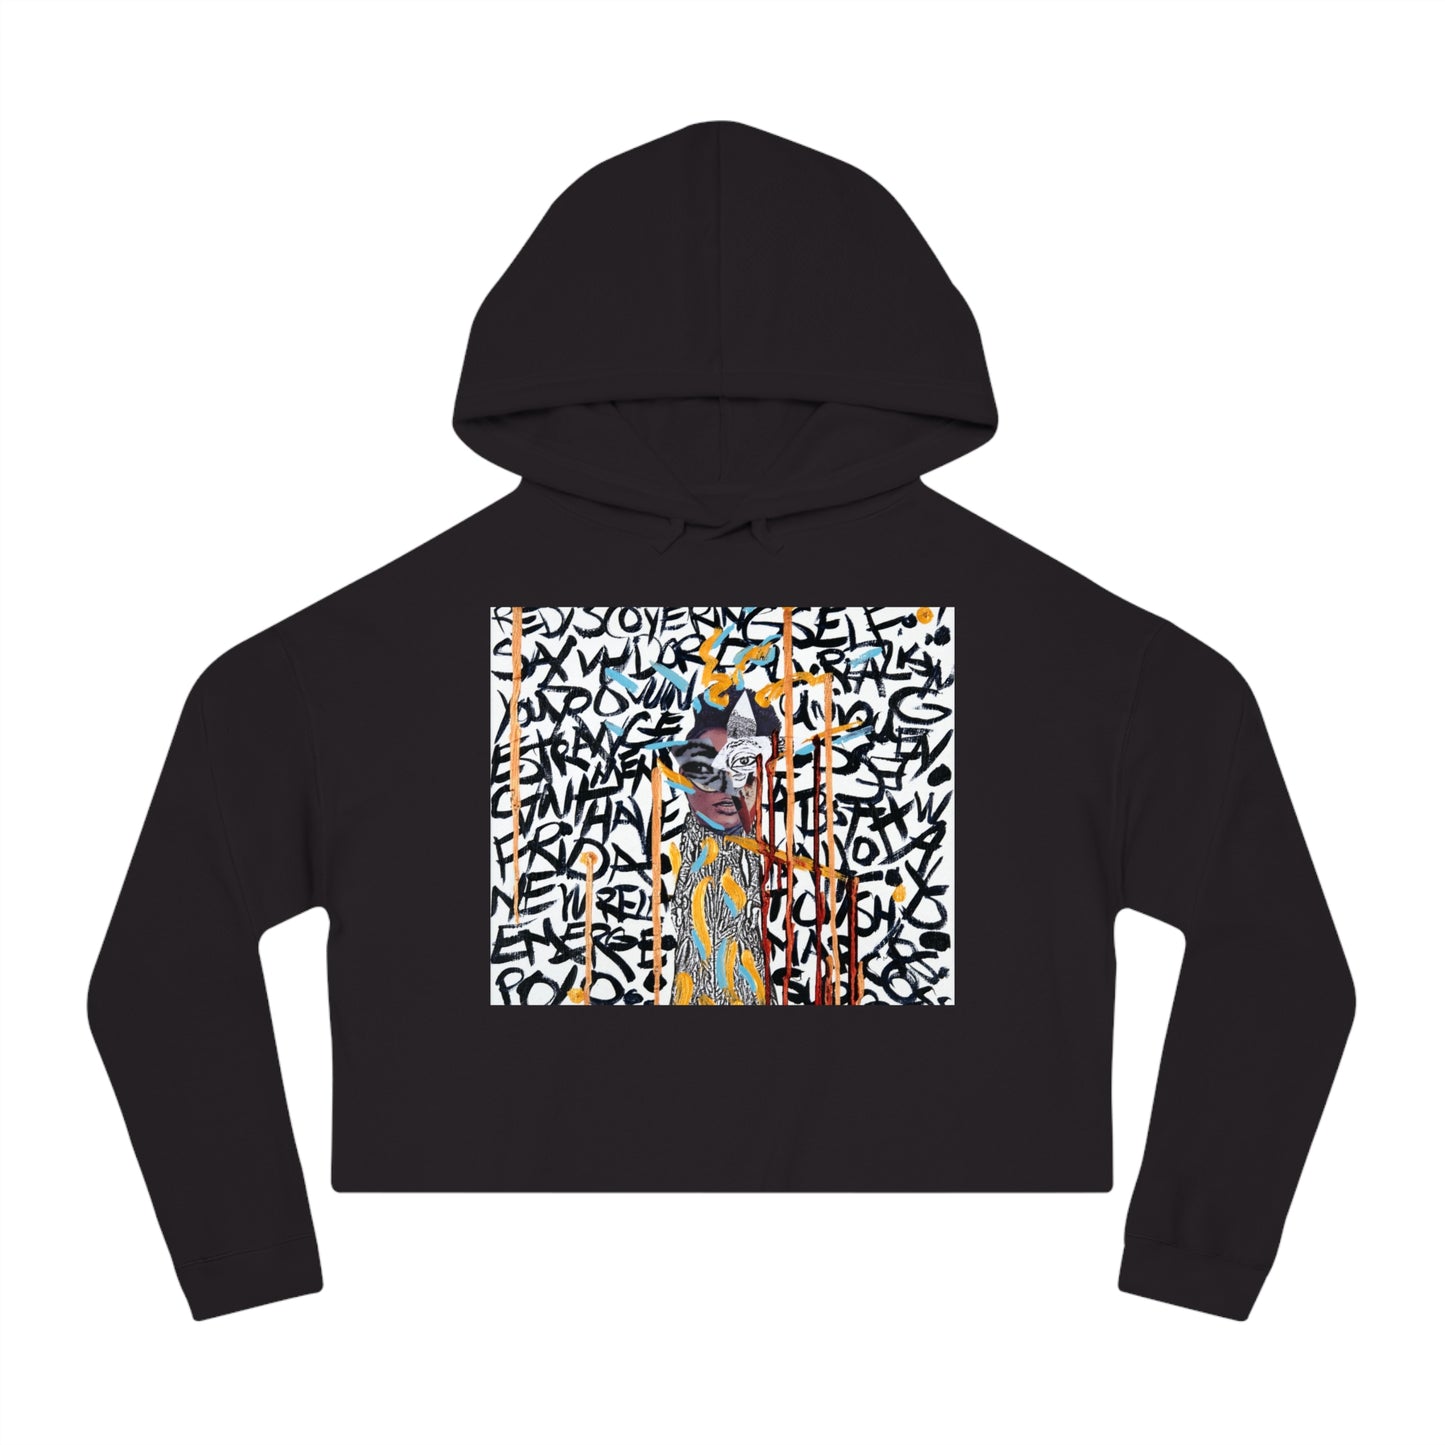 "Magritte by Courtney Minor" Cropped Hooded Sweatshirt